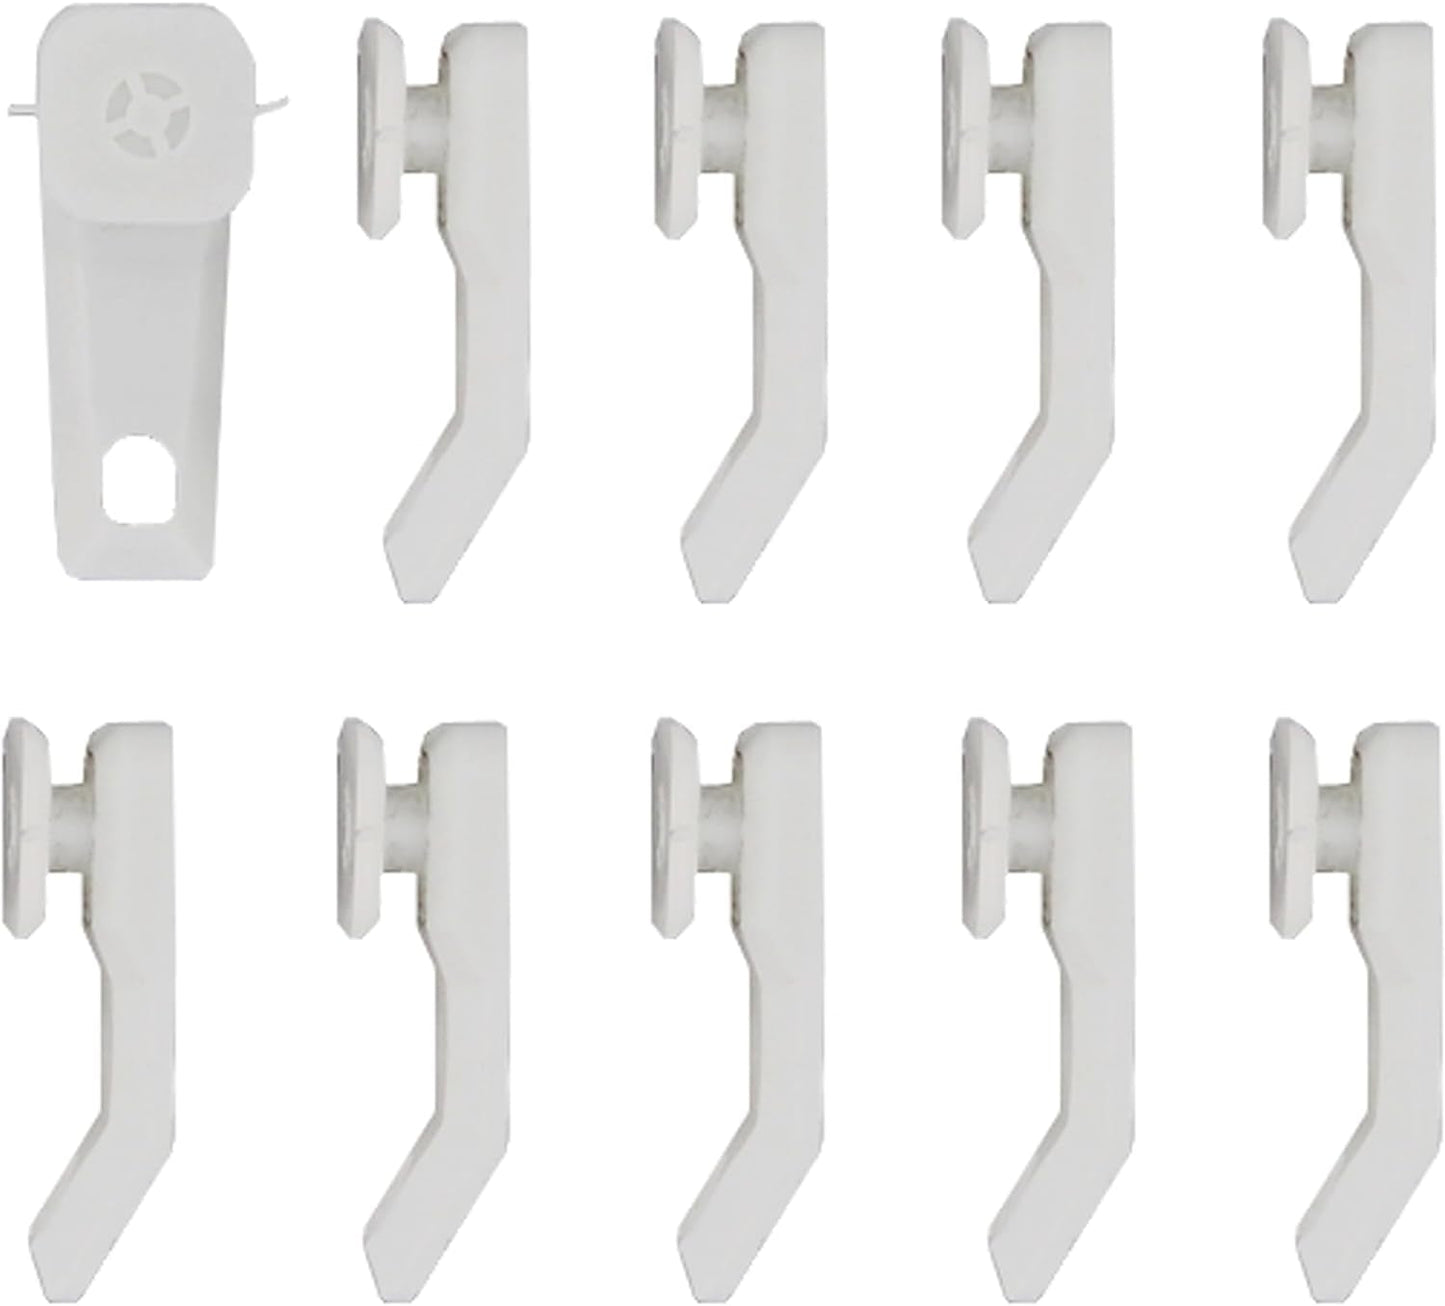 A&F Rod Decor - 10 Sliders for White Traverse Rods